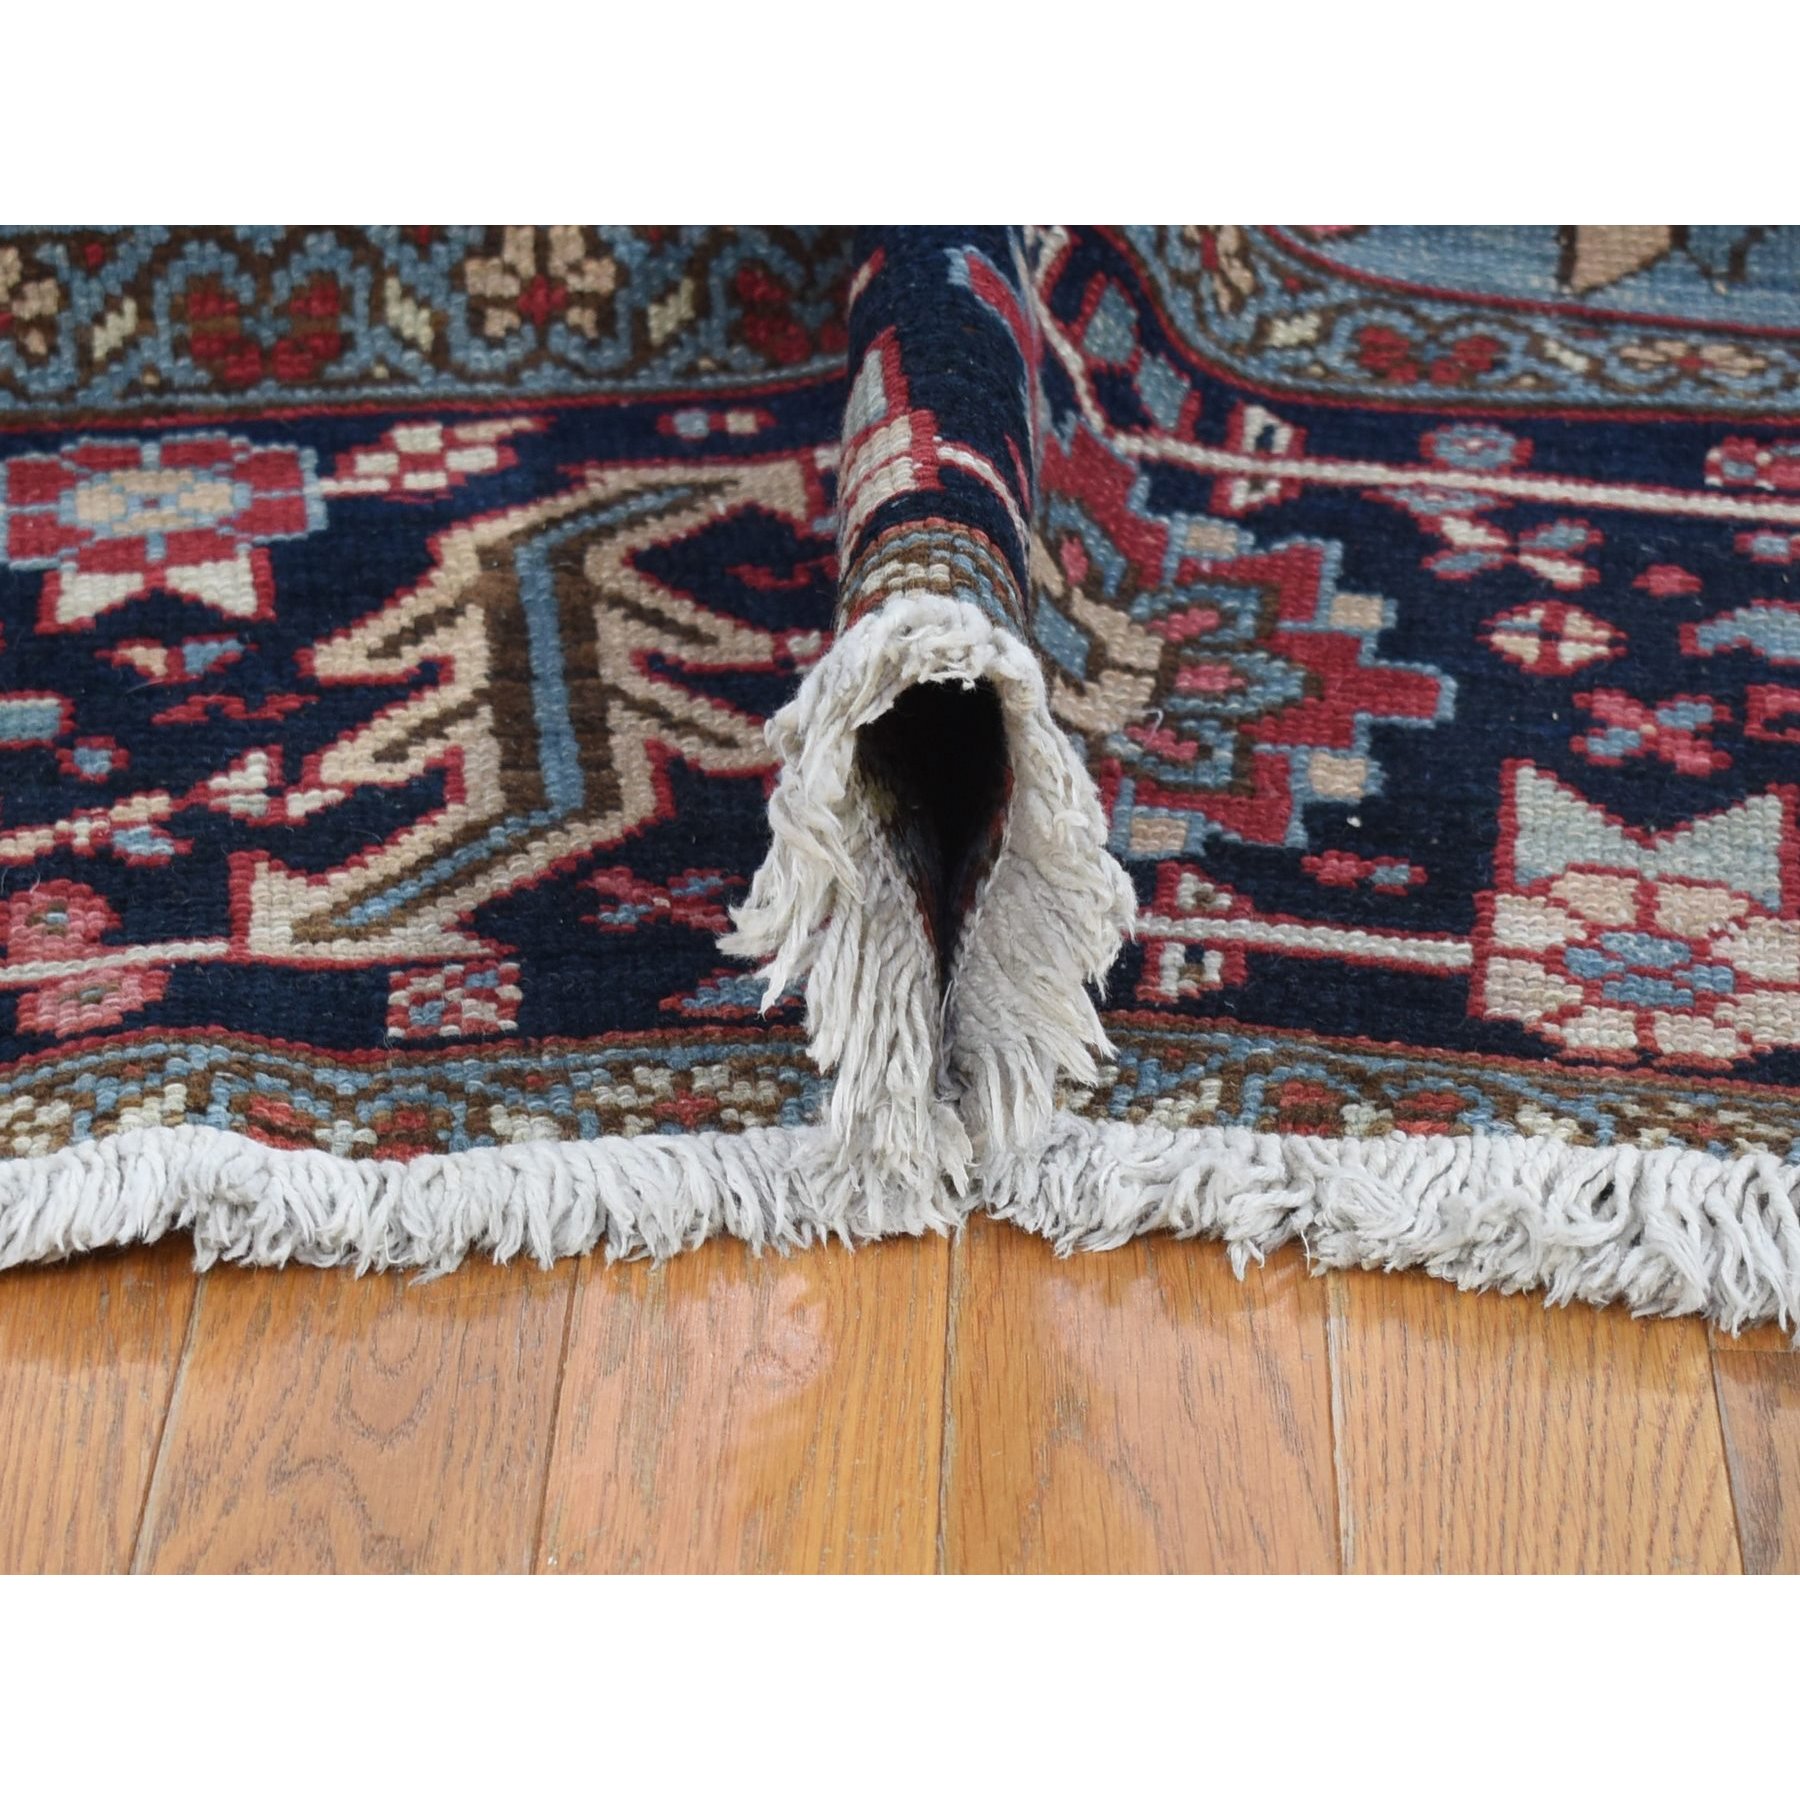 10'x12'8" Tomato Red, Antique Persian Heriz, Full Pile Pure Wool Evenly Wear Mint Condition, Hand Woven Oriental Rug 